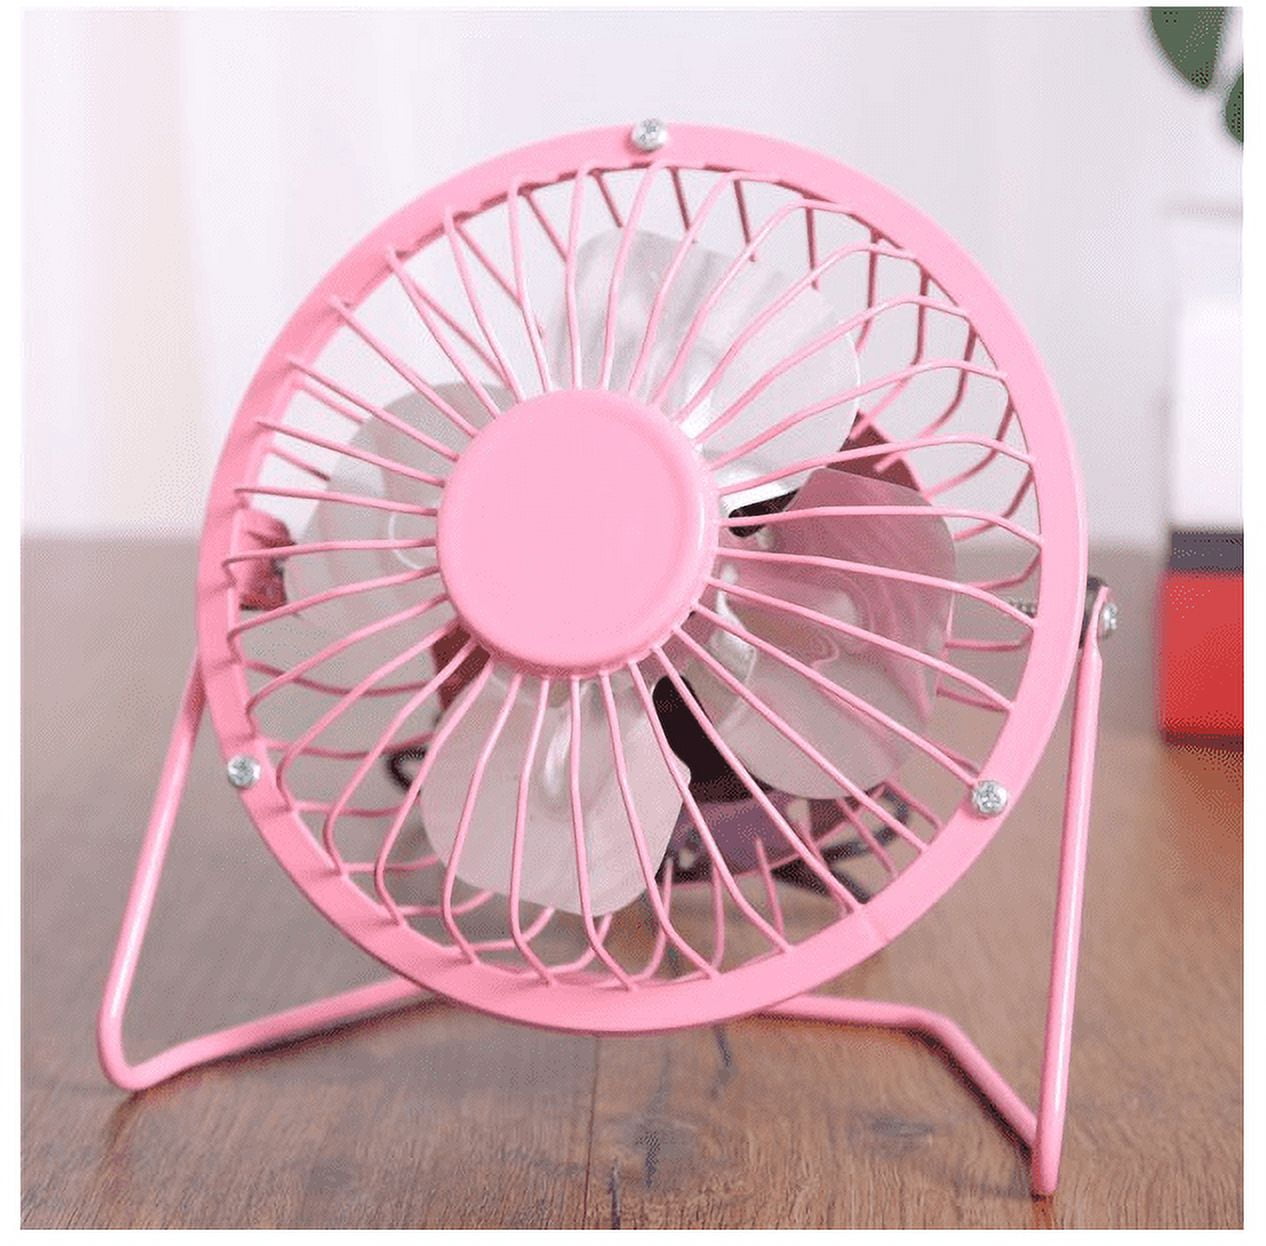 Mini USB Desk Fan with Clock LED Display,Small Oscillating Table Fan 4  Speeds Strong Wind,180°Rotate,Quiet Portable Personal Desktop Fan4000mAh